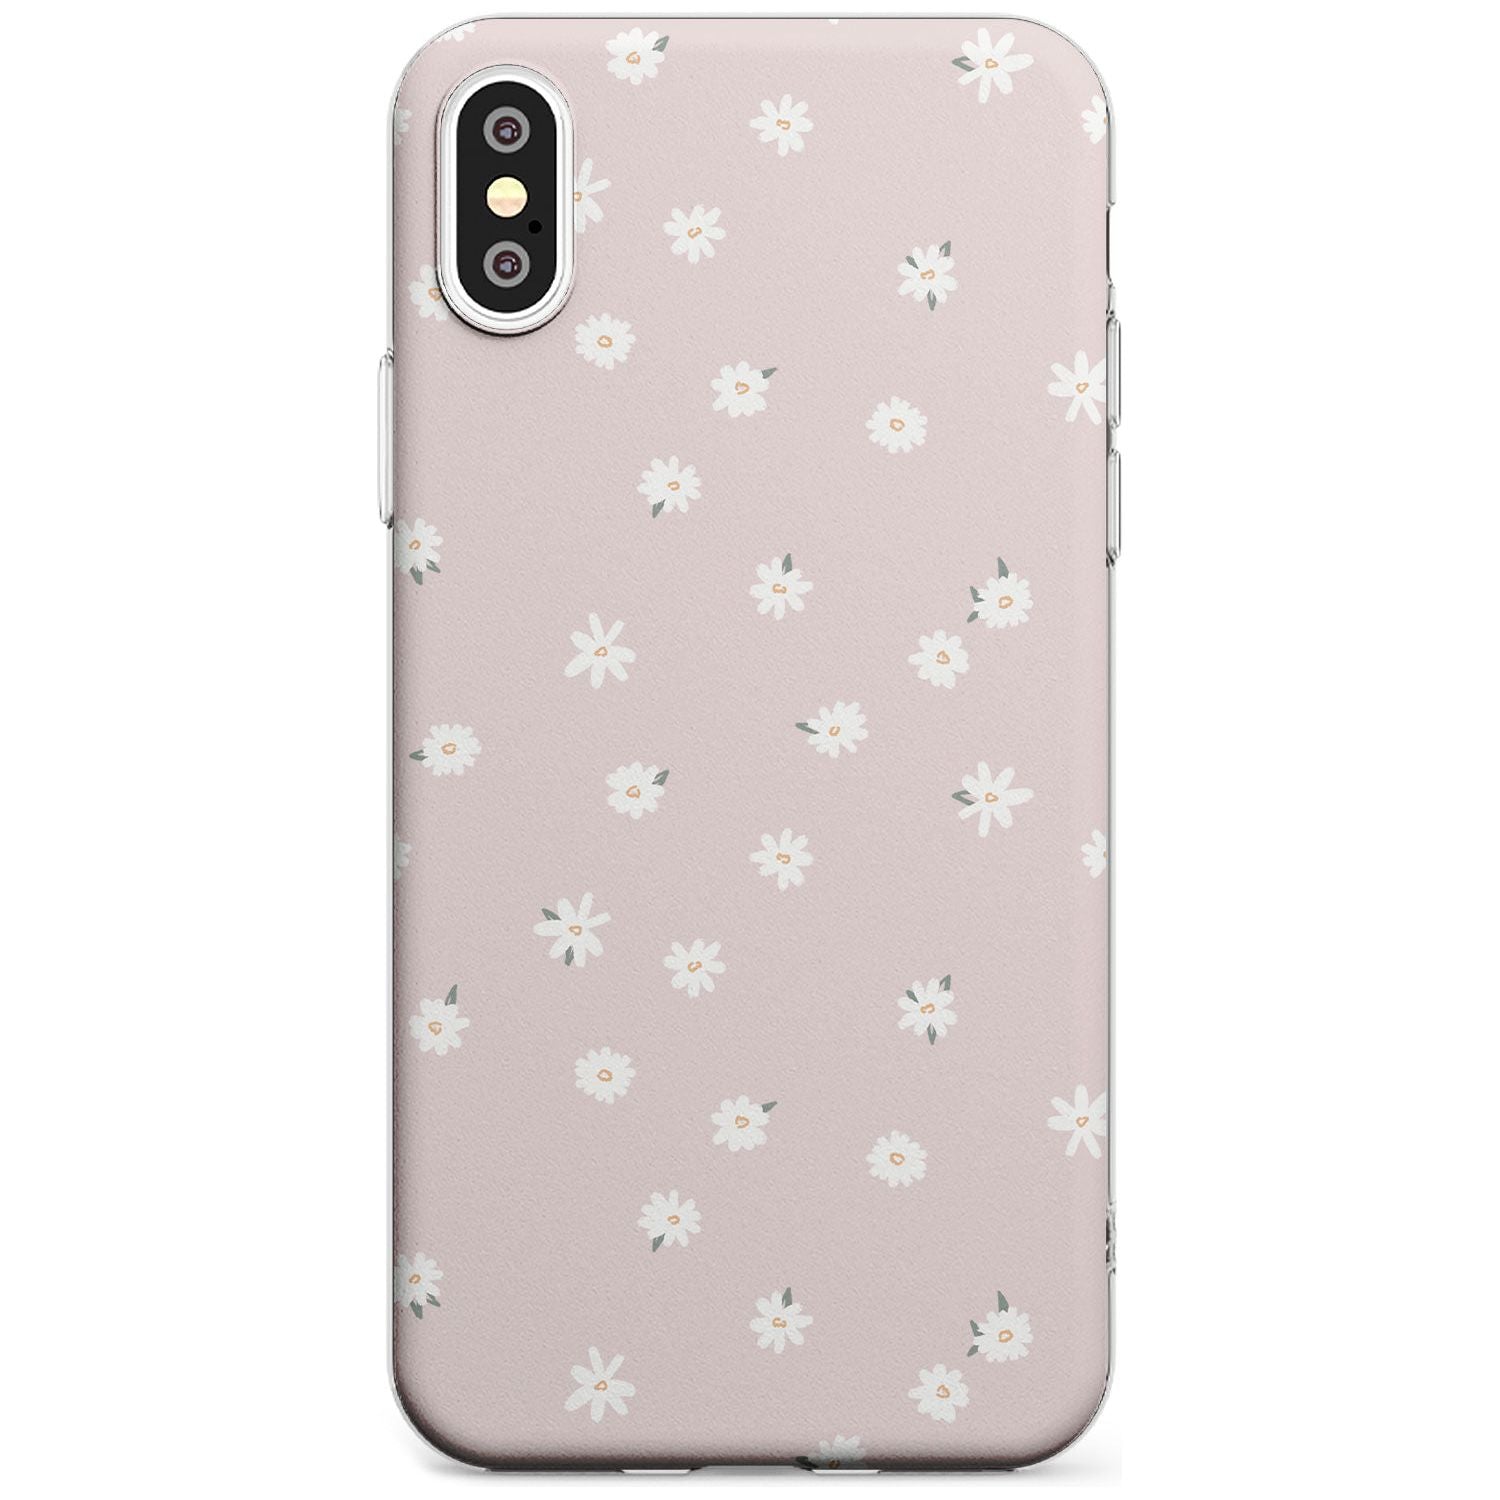 Painted Daises on Pink - Cute Floral Daisy Design Black Impact Phone Case for iPhone X XS Max XR